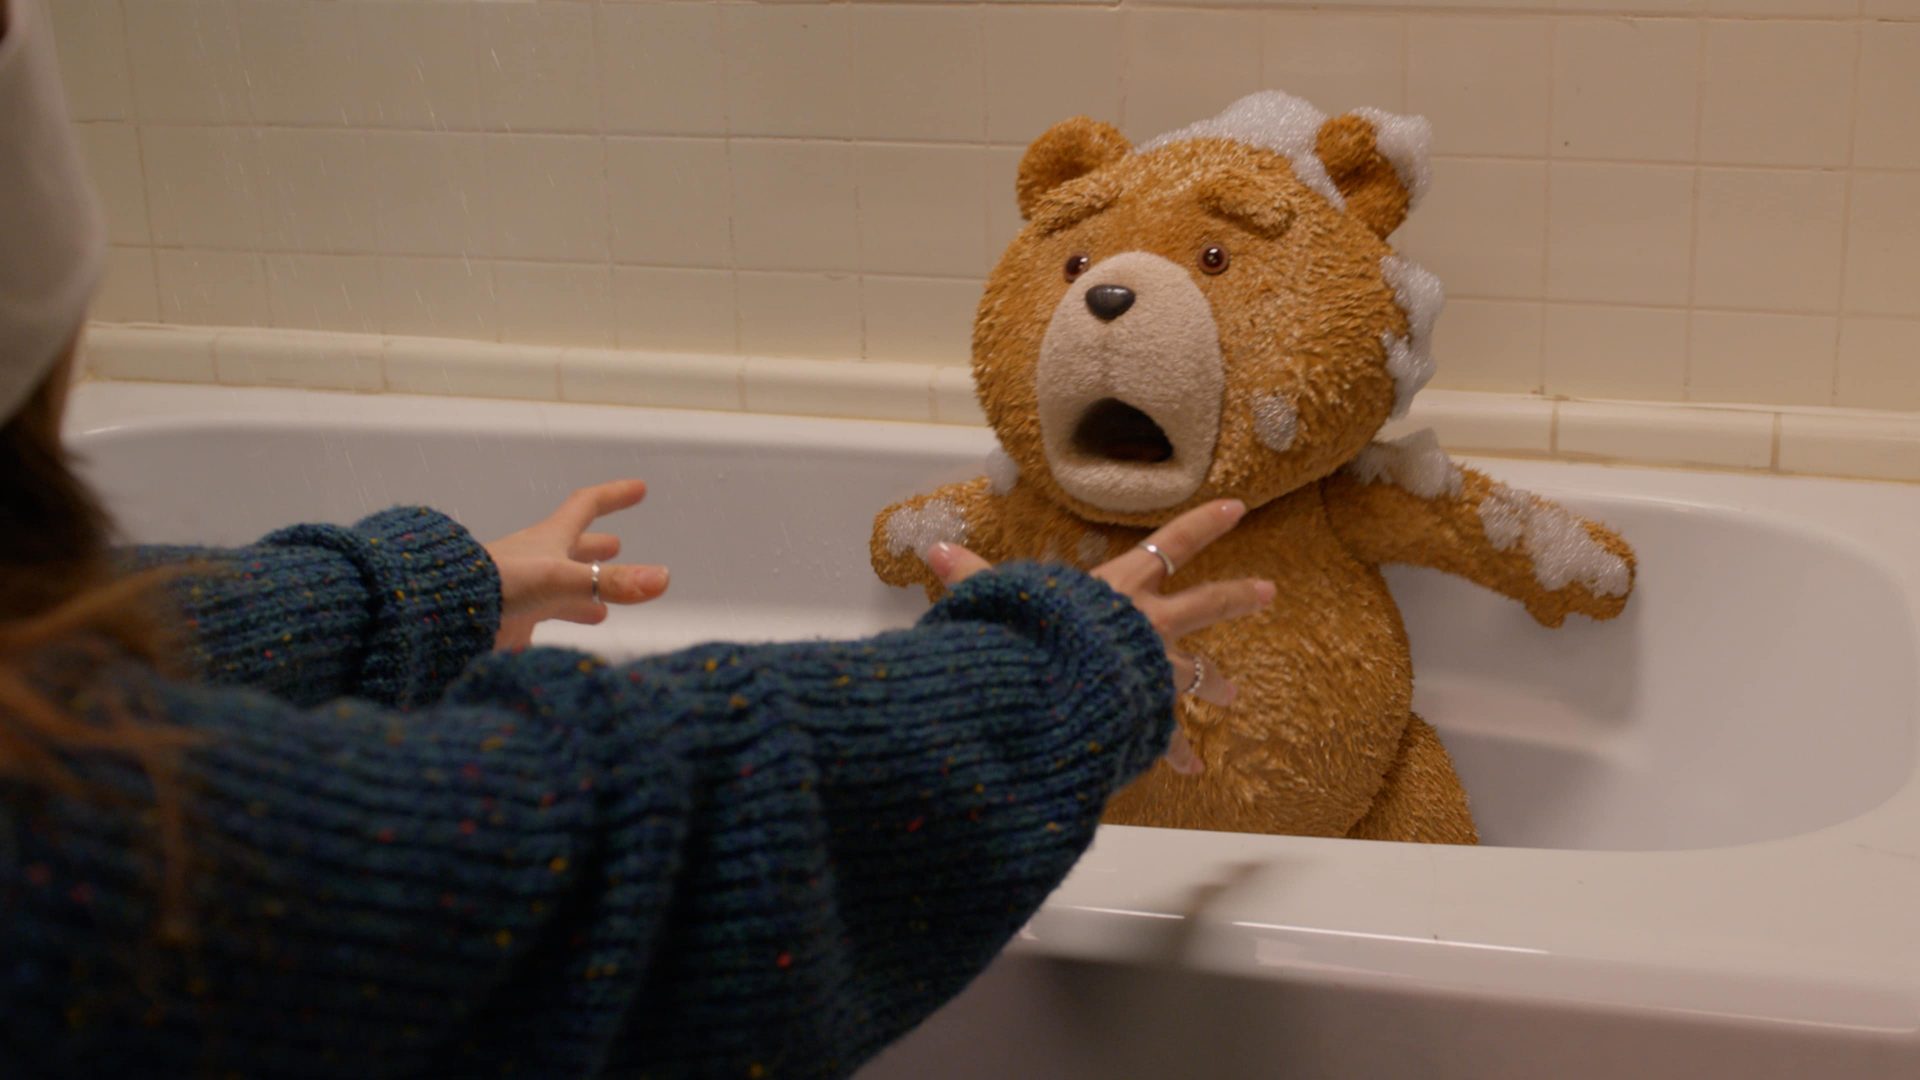 ted serial skyshowtime prequel recenzja opinie